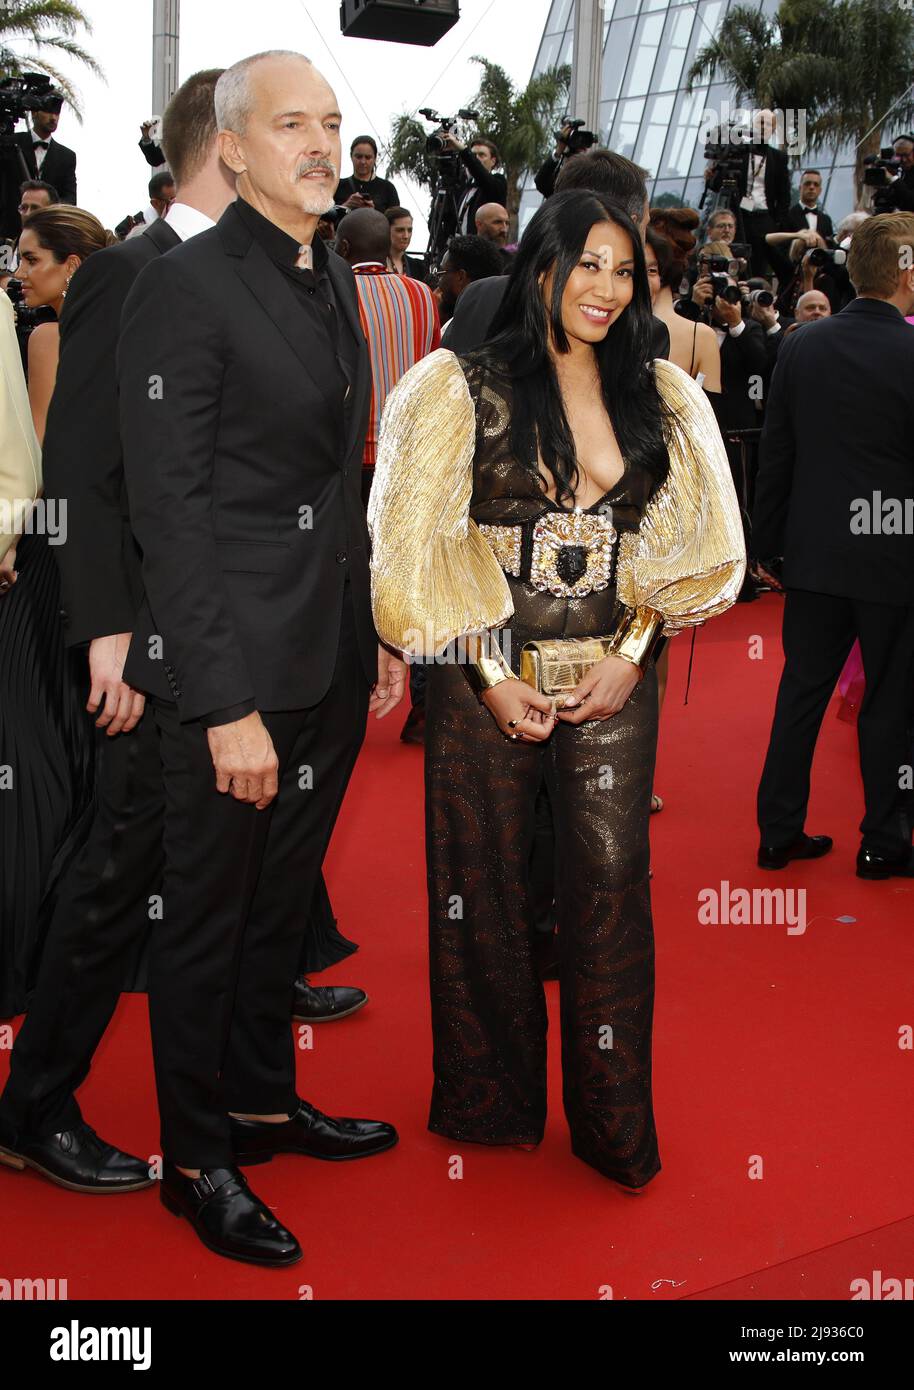 Cannes, France. 18th May, 2022. Anggun attends the screening of 'Top Gun: Maverick' during the 75th annual Cannes film festival at Palais des Festivals on May 18, 2022 in Cannes, France. Photo: DGP/imageSPACE Credit: Imagespace/Alamy Live News Stock Photo